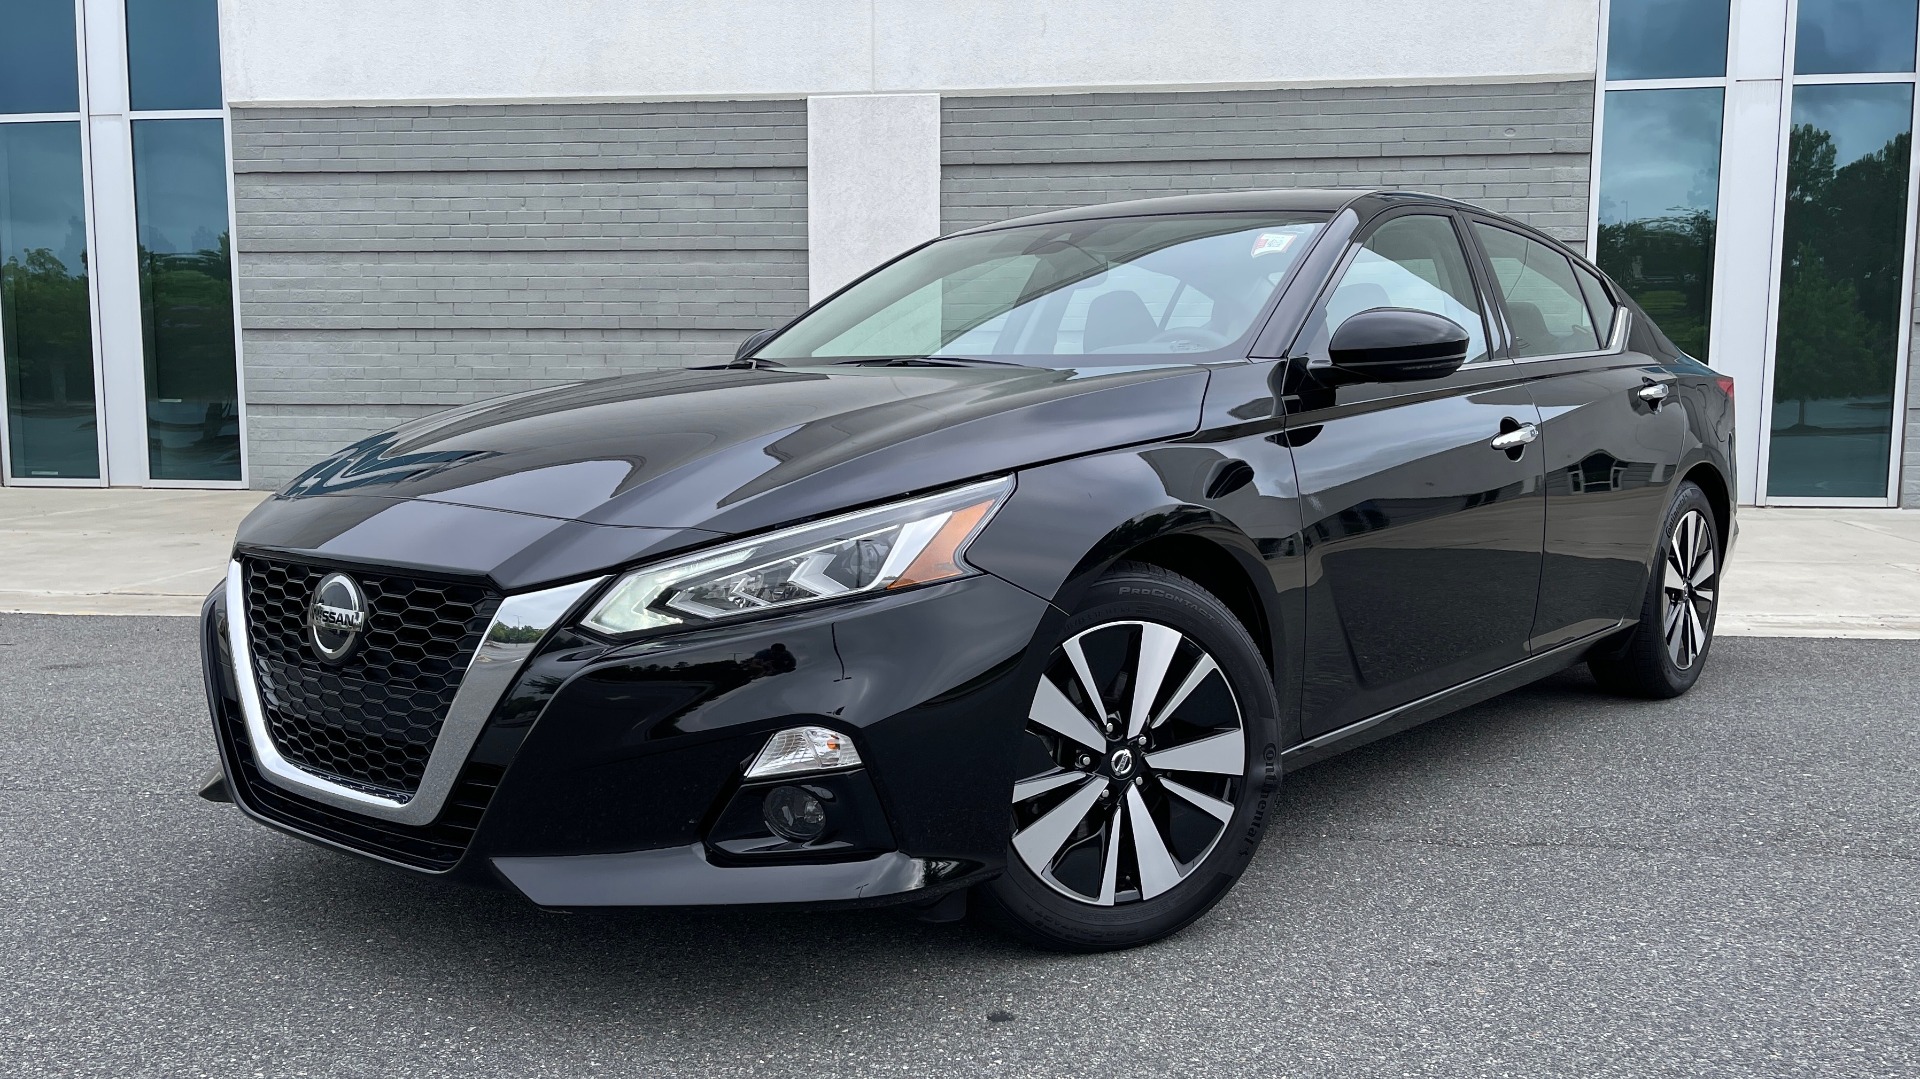 Used 2019 Nissan ALTIMA 2.5 SV SEDAN / CVT TRANS / SUNROOF / REARVIEW / LOW MILES for sale Sold at Formula Imports in Charlotte NC 28227 1